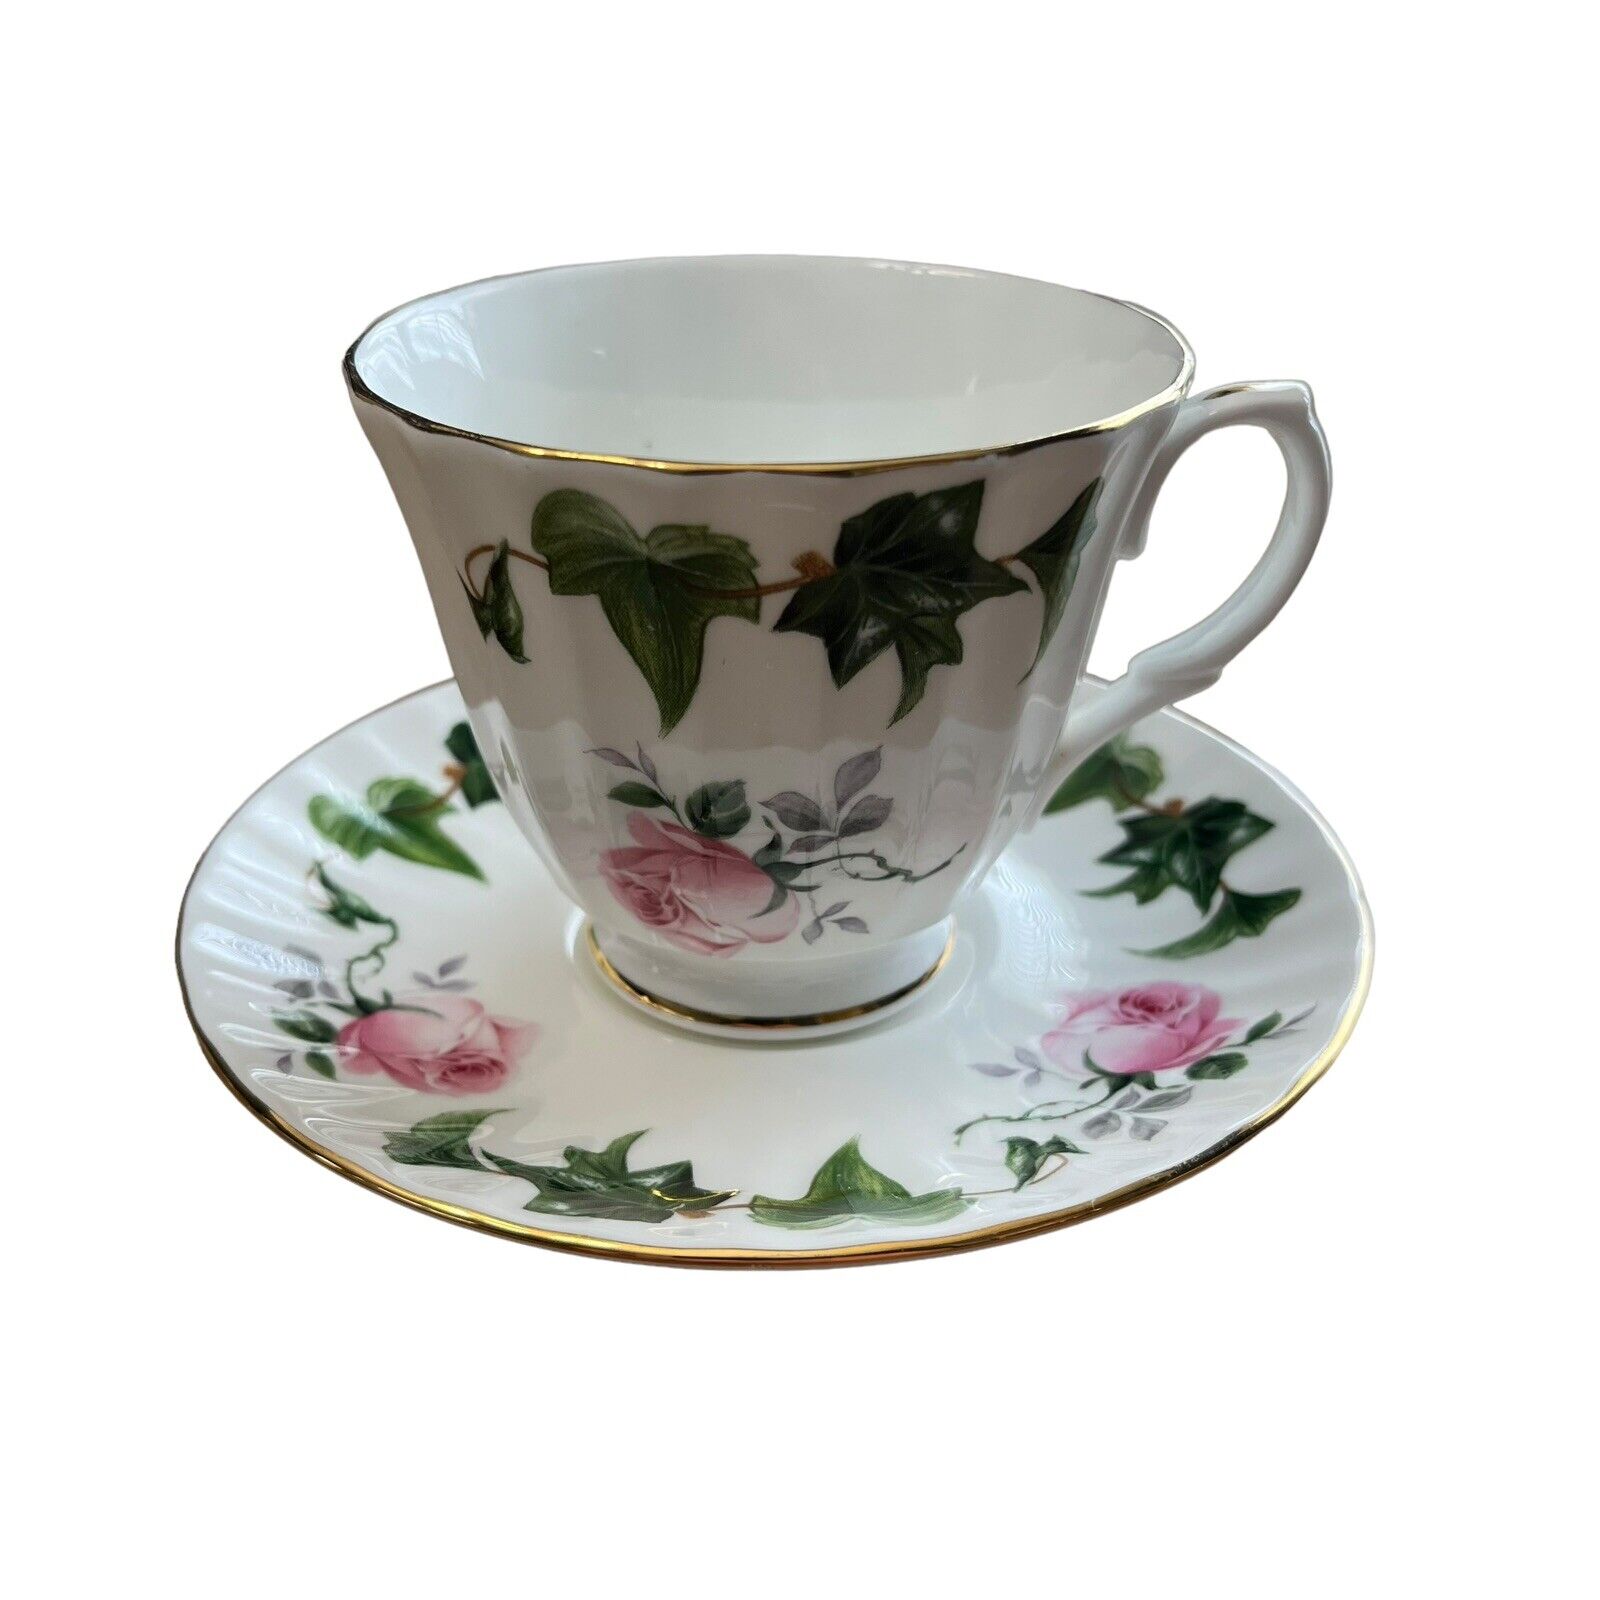 Duchess Bone China England Pink Rose and Ivy Footed Tea Cup & Saucer - QUANTITY